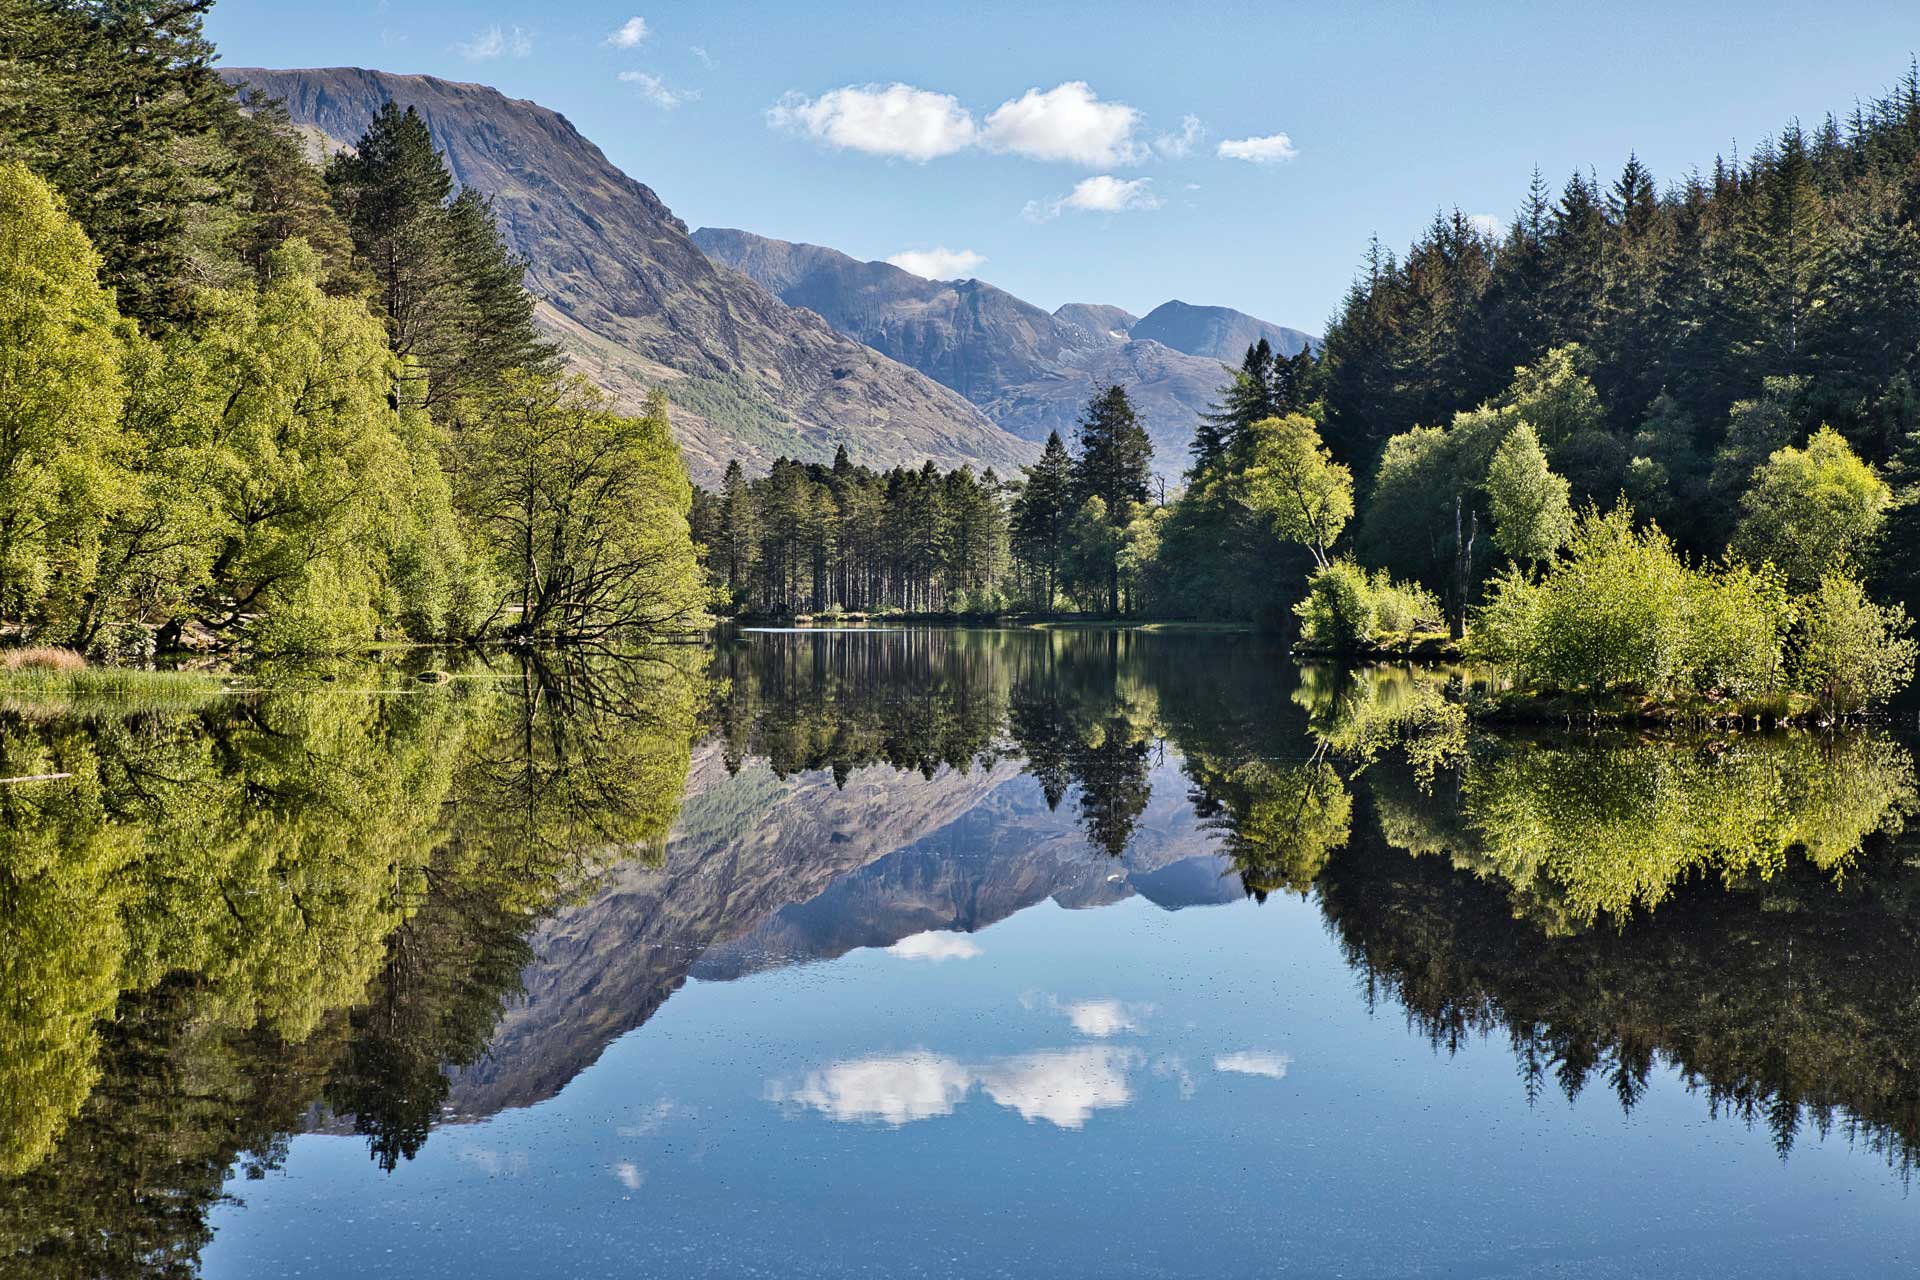 The Glencoe Lochan is popular for walks with guests at Glencoe Hideaways